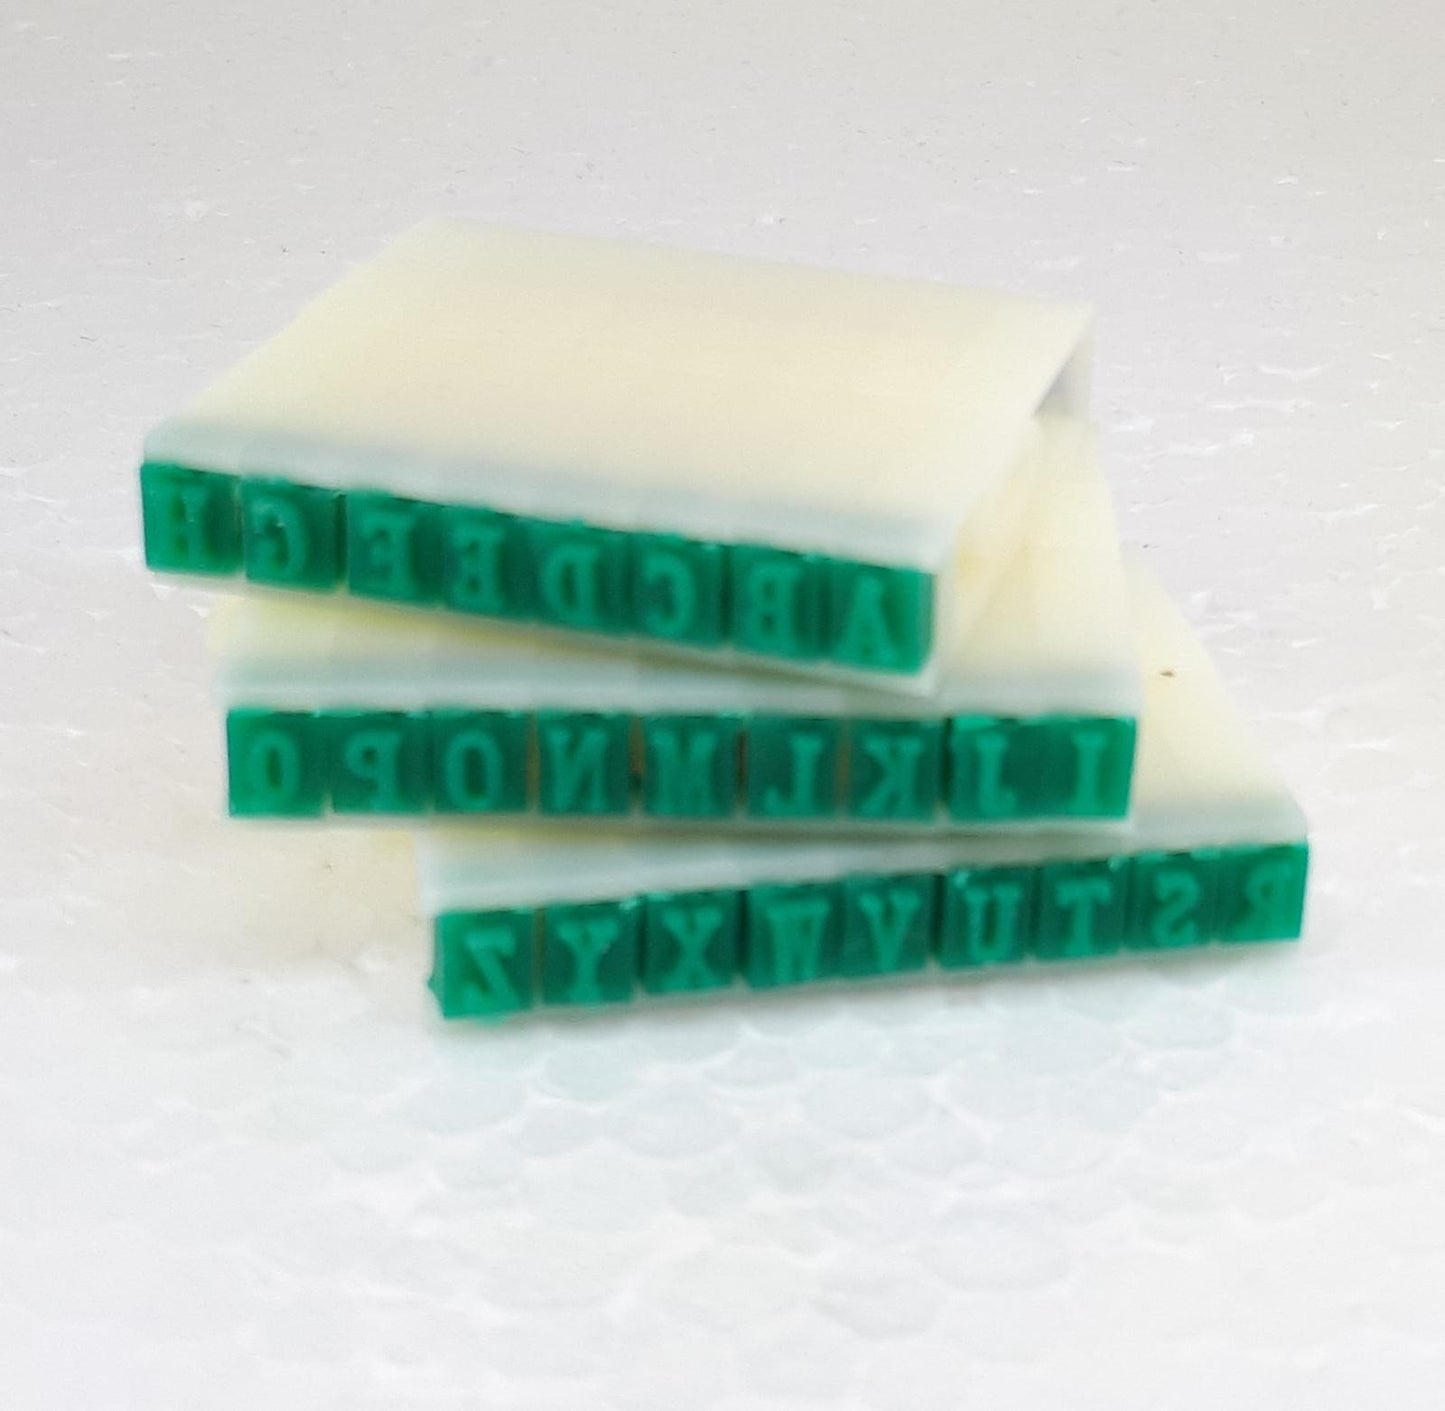 AS040-LETTER PRINT SET CAPS for clay